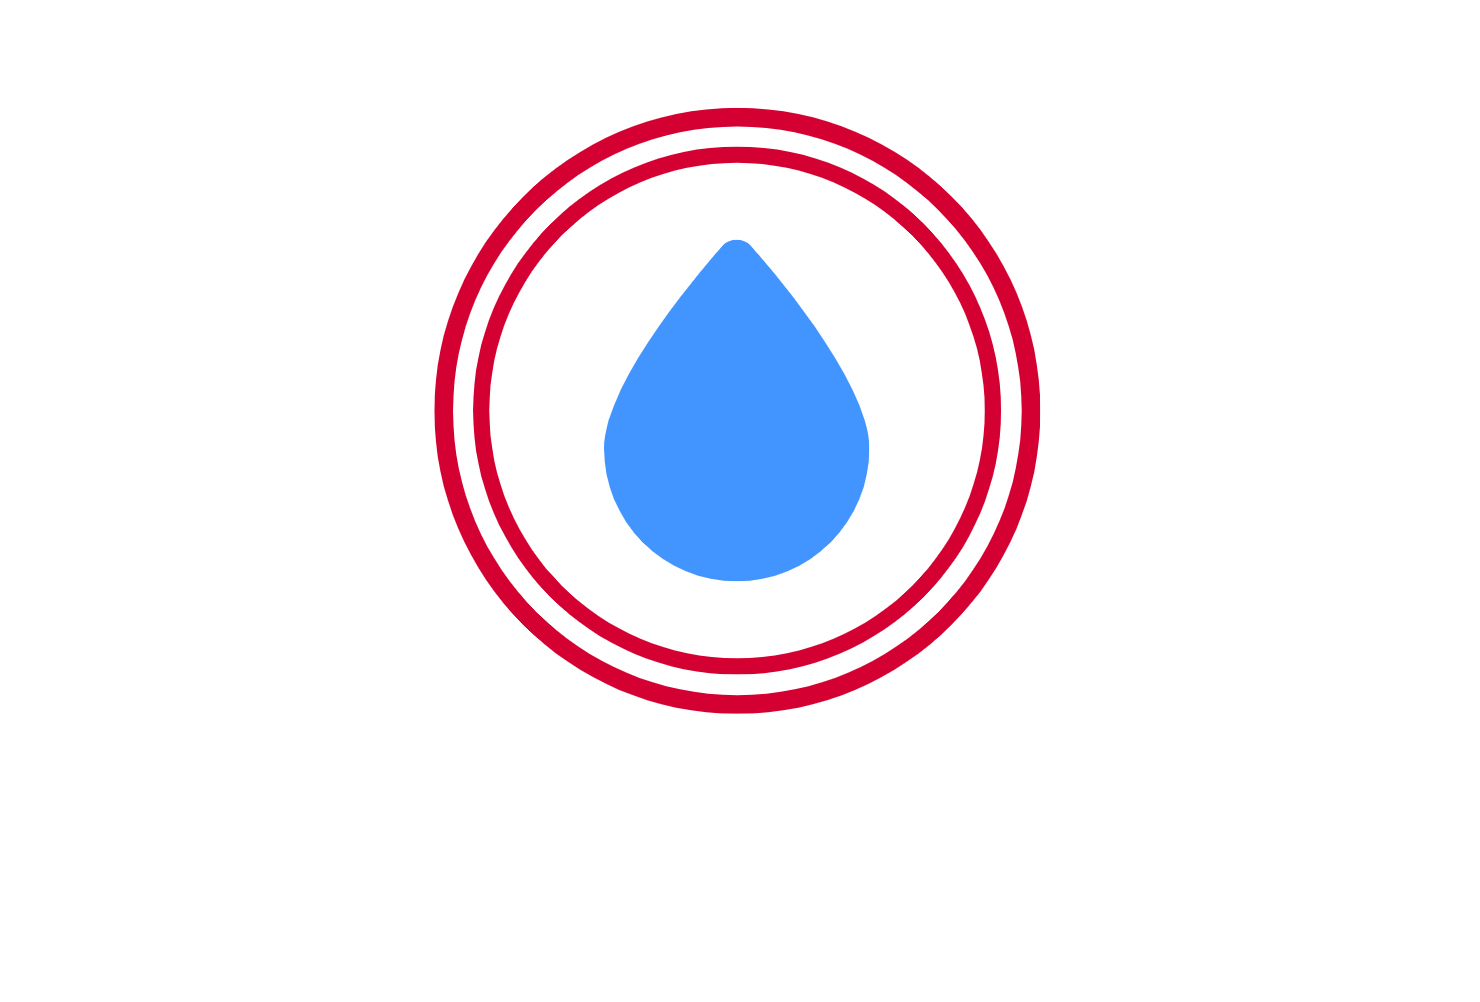 Simple low-cost solution to costly water damage. Flood Buzz are small water leak alarms placed in likely leaky spots throughout your home. At the drop of water, the alarm sounds, alerting you to a leak and avoiding expensive water damage.